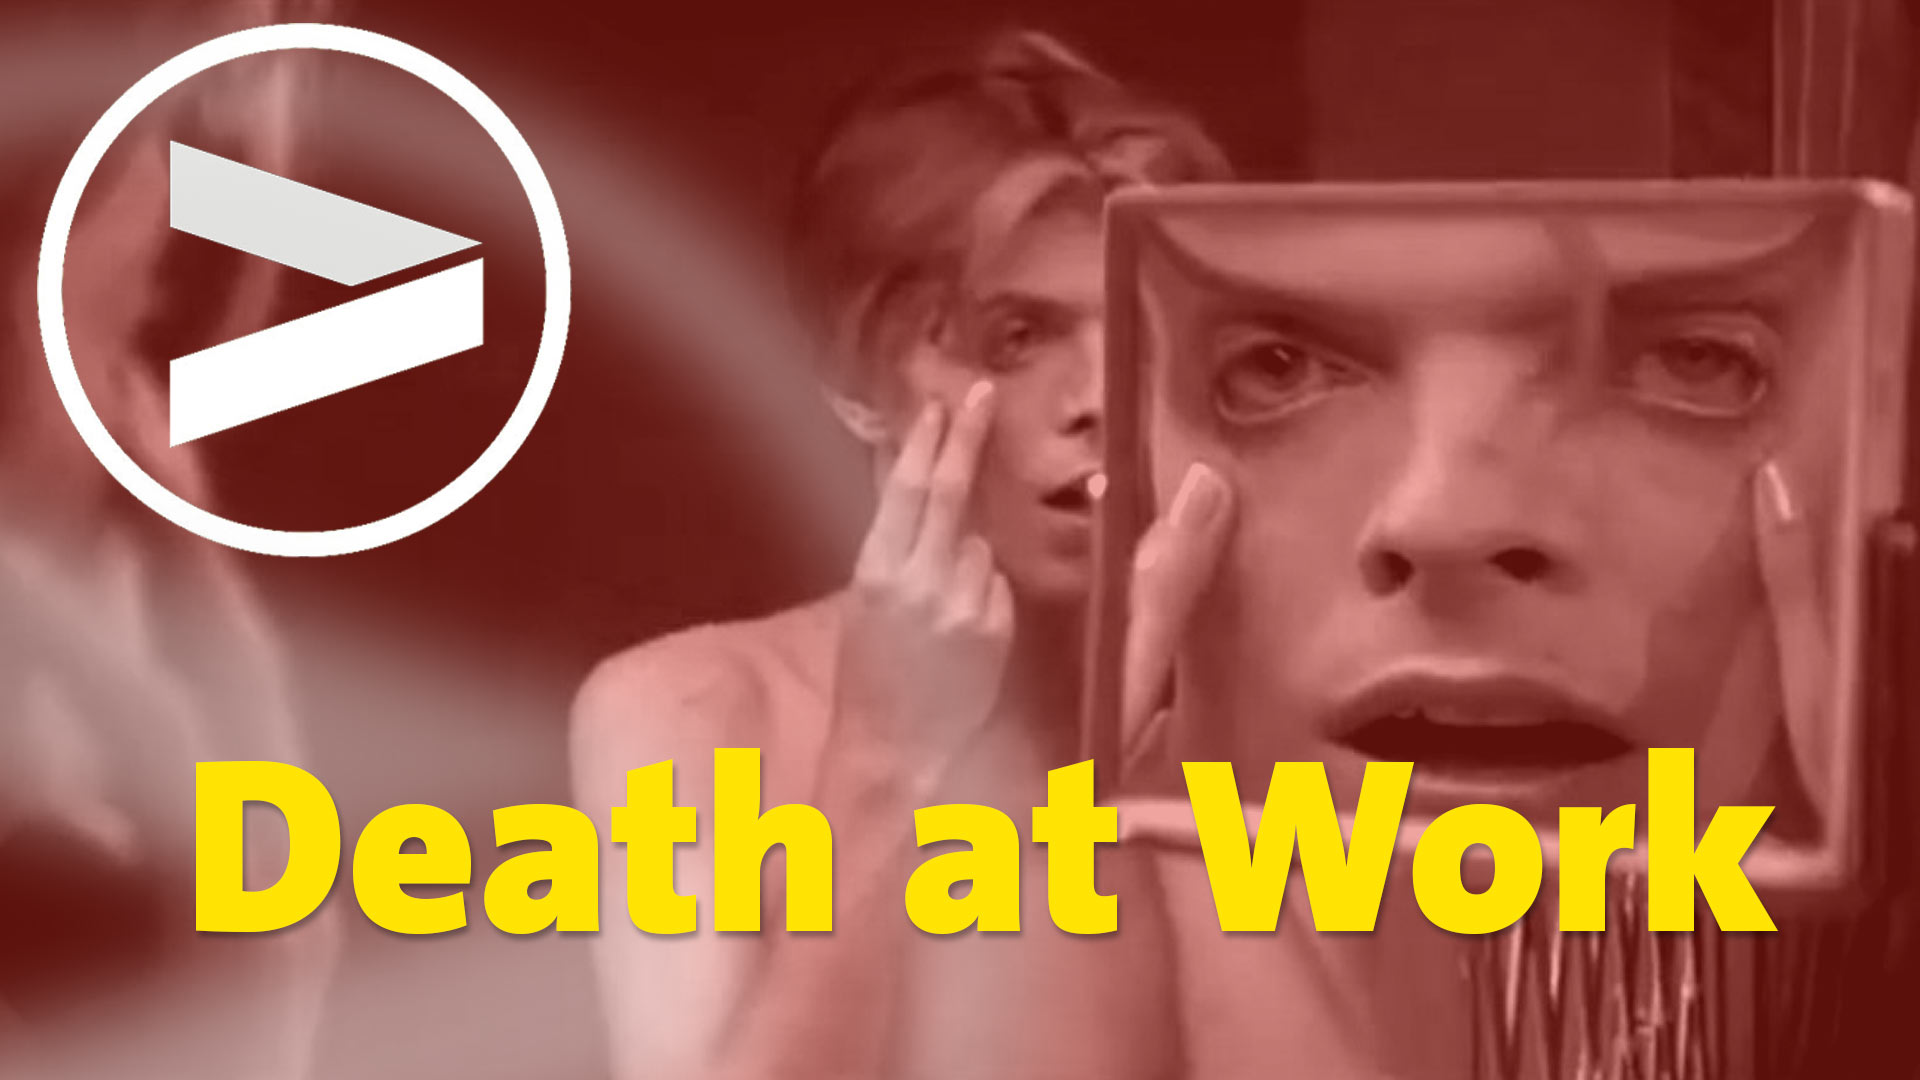 Death at Work: The Mirror sees it all